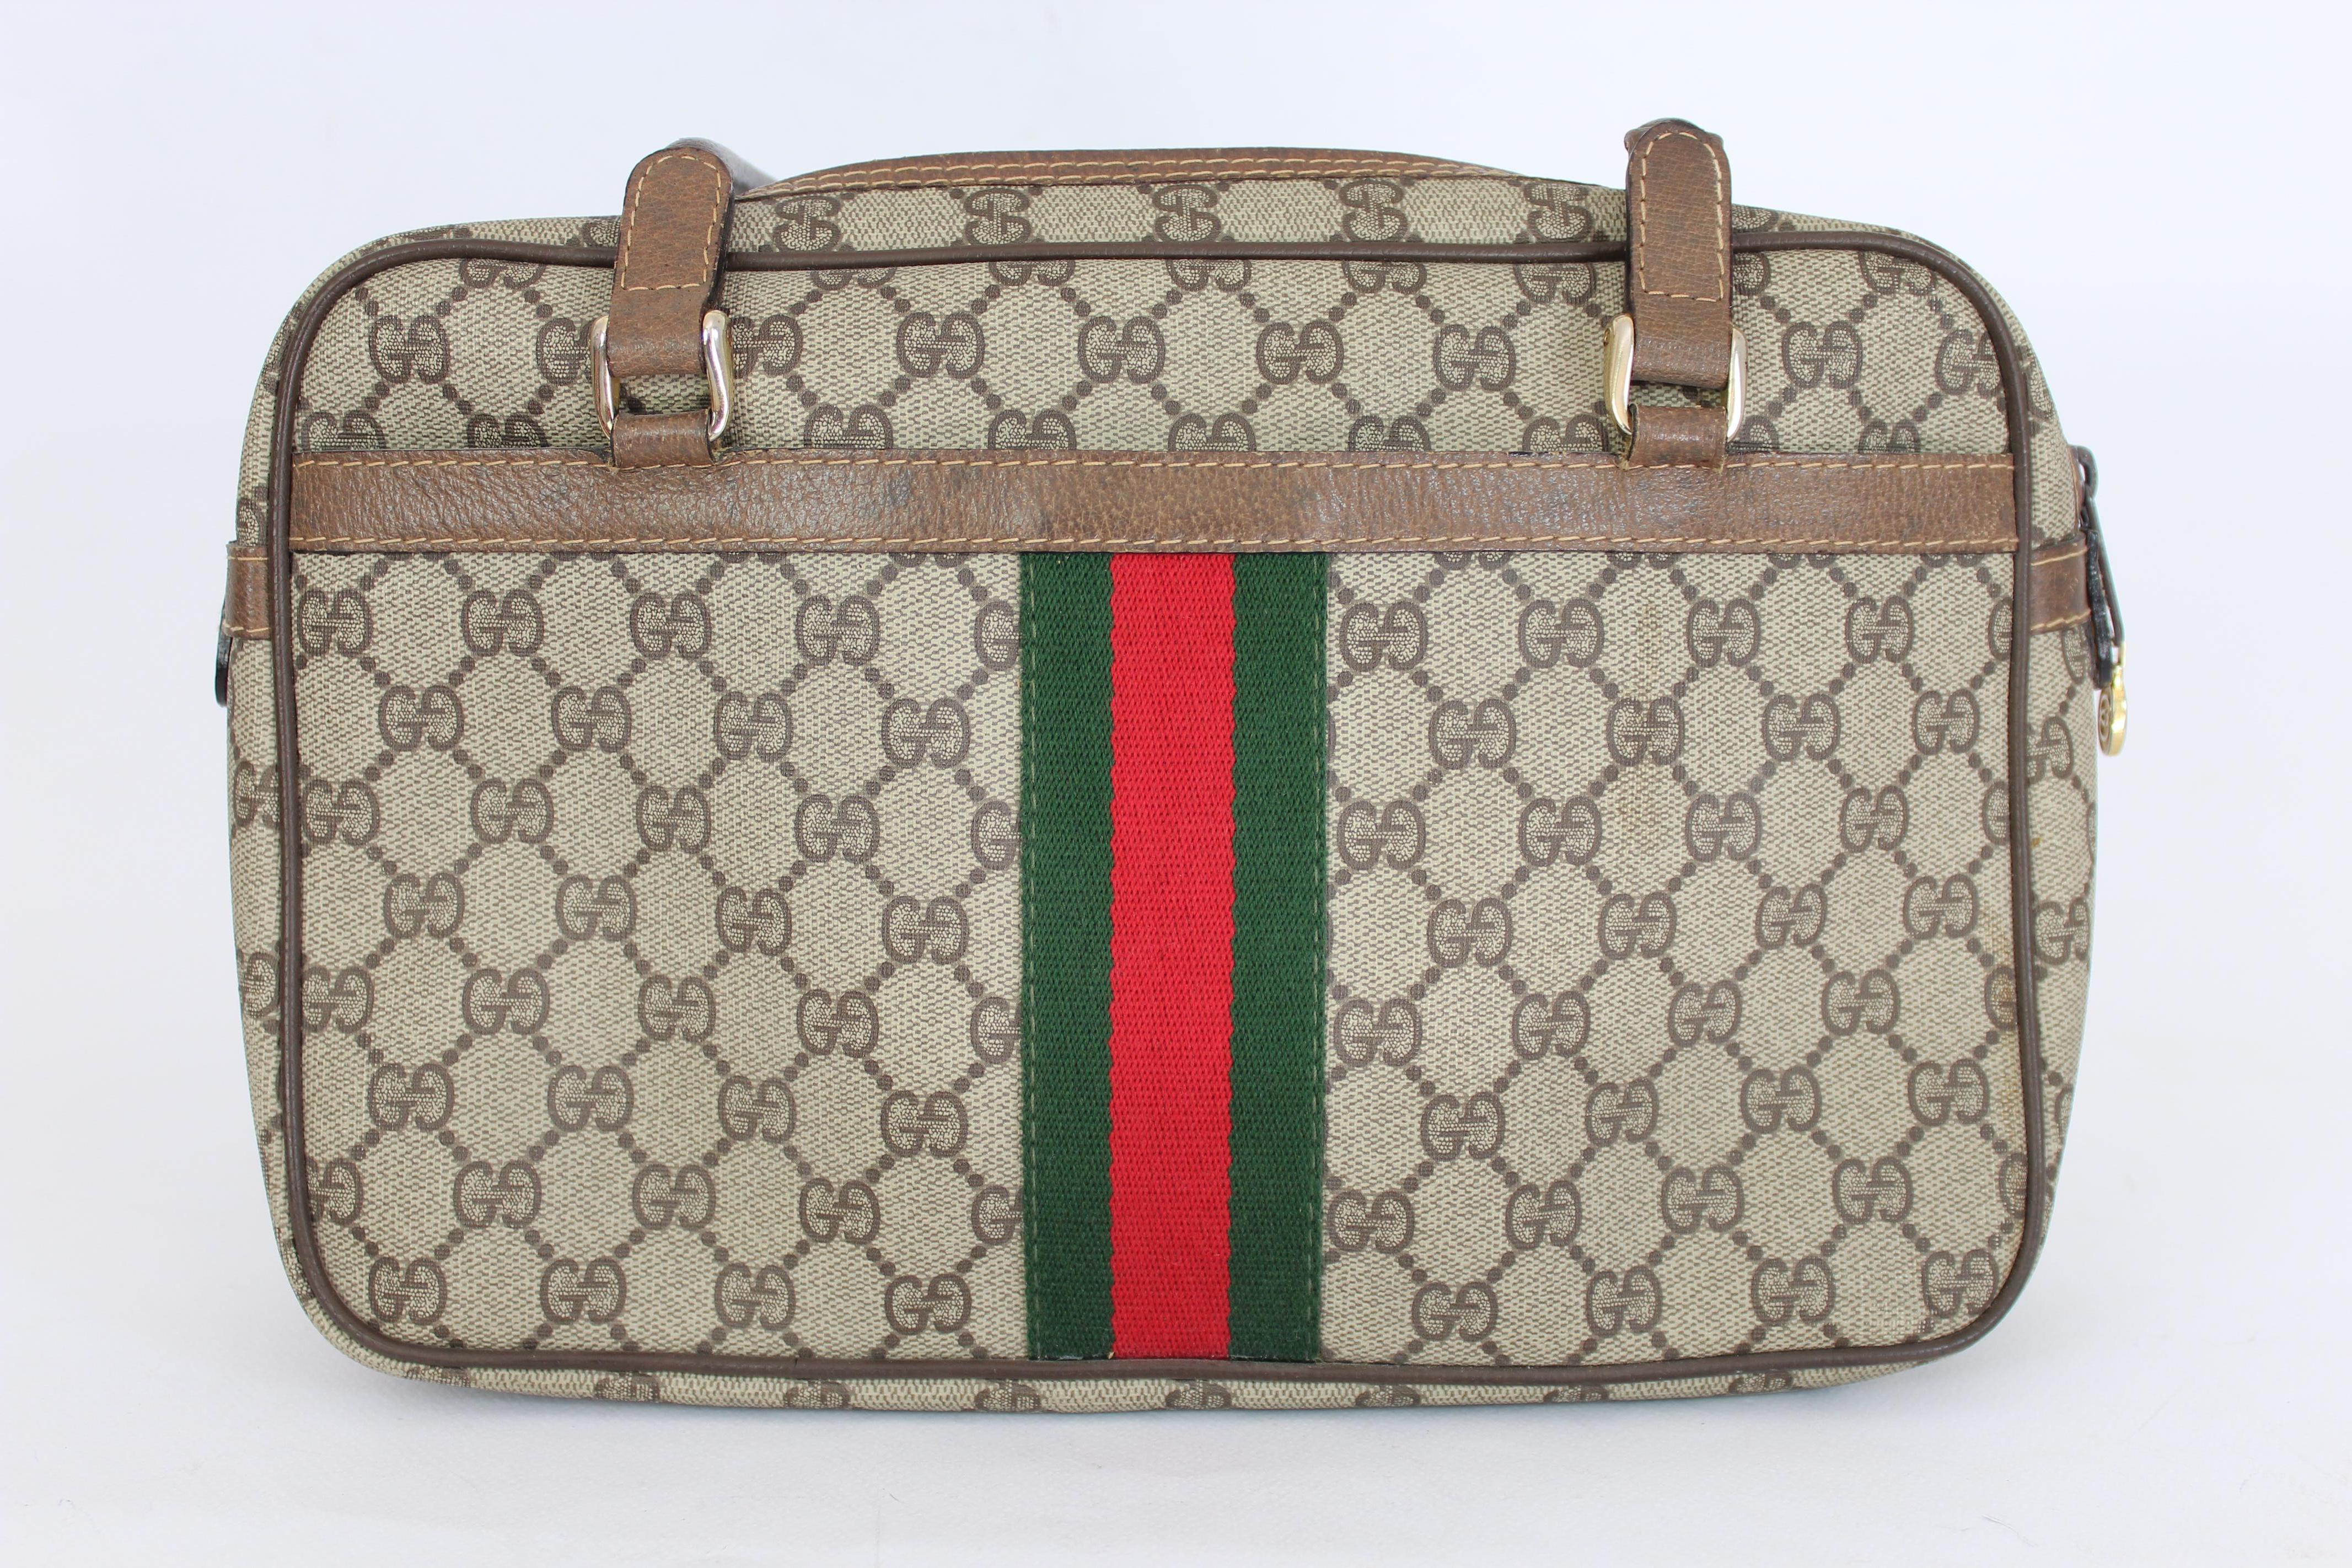 Gucci Ophidia vintage bag 80s. Handbag type satchel, brown and beige with green and red bands. Gold-colored details, both internal and external pockets. Canvas fabric with leather handles and edges. Made in Italy. The overall condition of the bag is